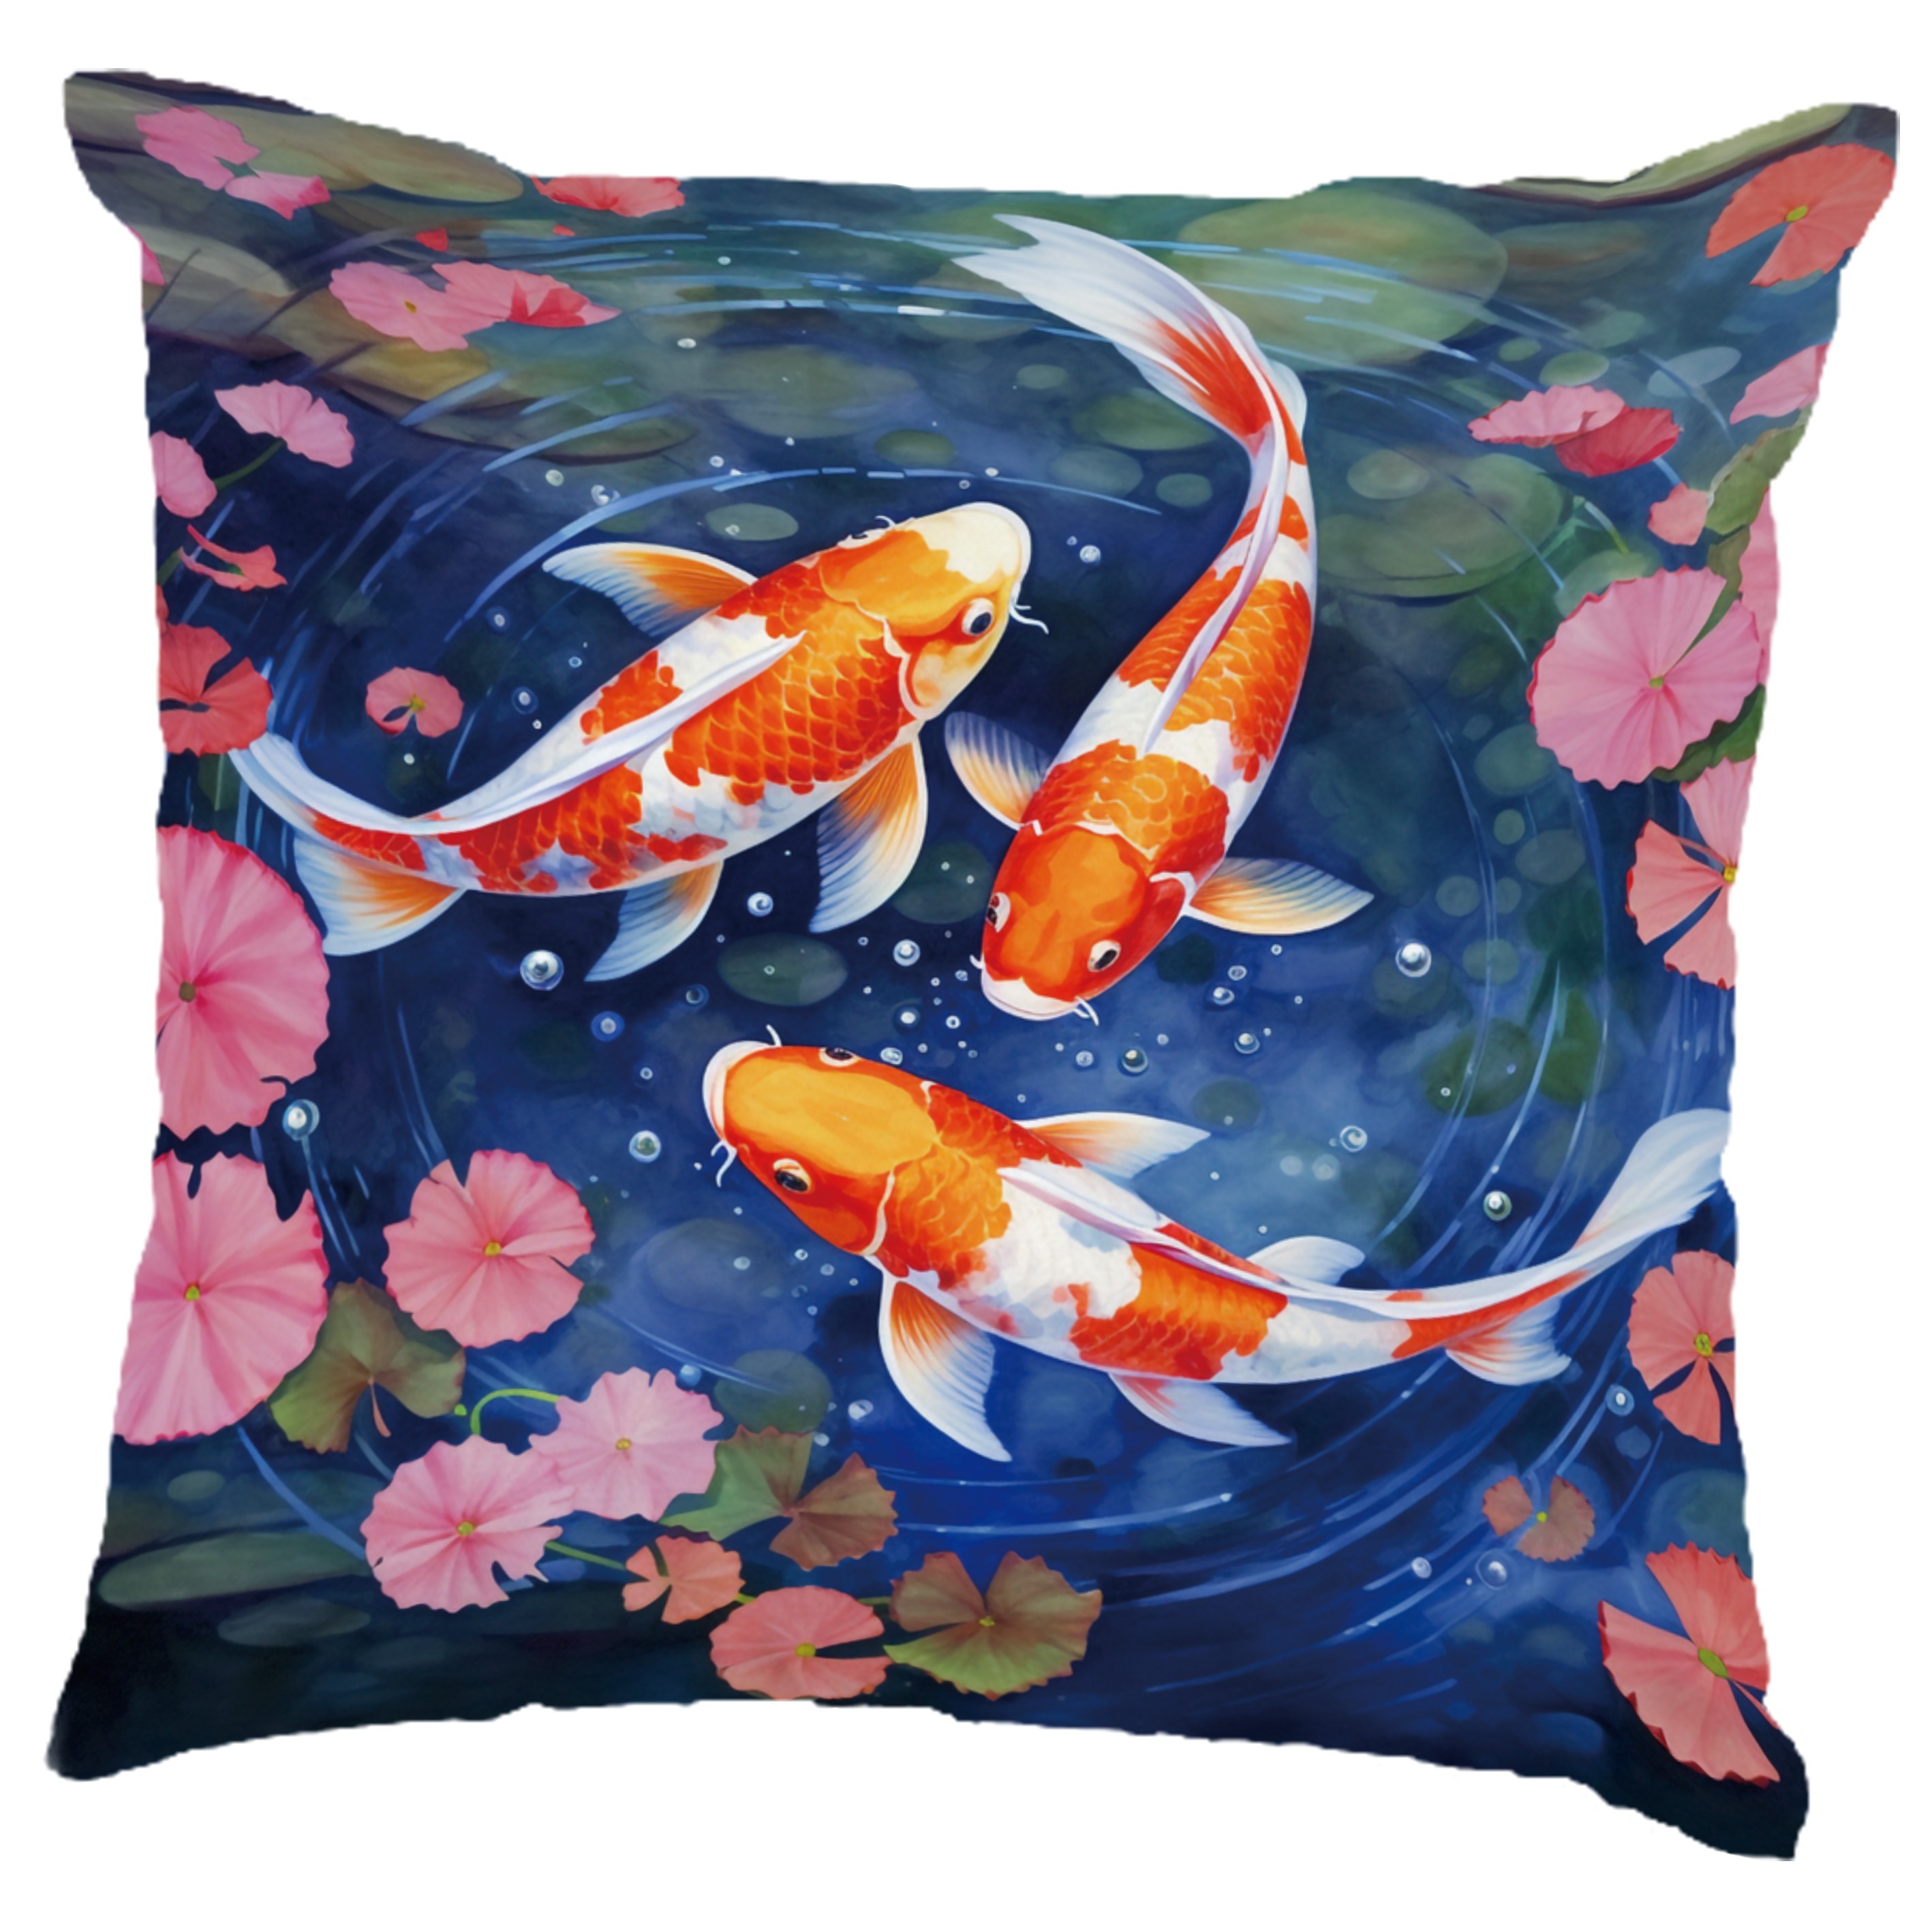 

1pc, Fish, Koi, Floral, Lake Water, Fashion Pattern, Printed Pillowcase, Home Decor, Room Decor, Living Room Decor, Bedroom Decor, Sofa Decor, Throw Pillow Case, 18in*18in, Pillow Insert Not Included